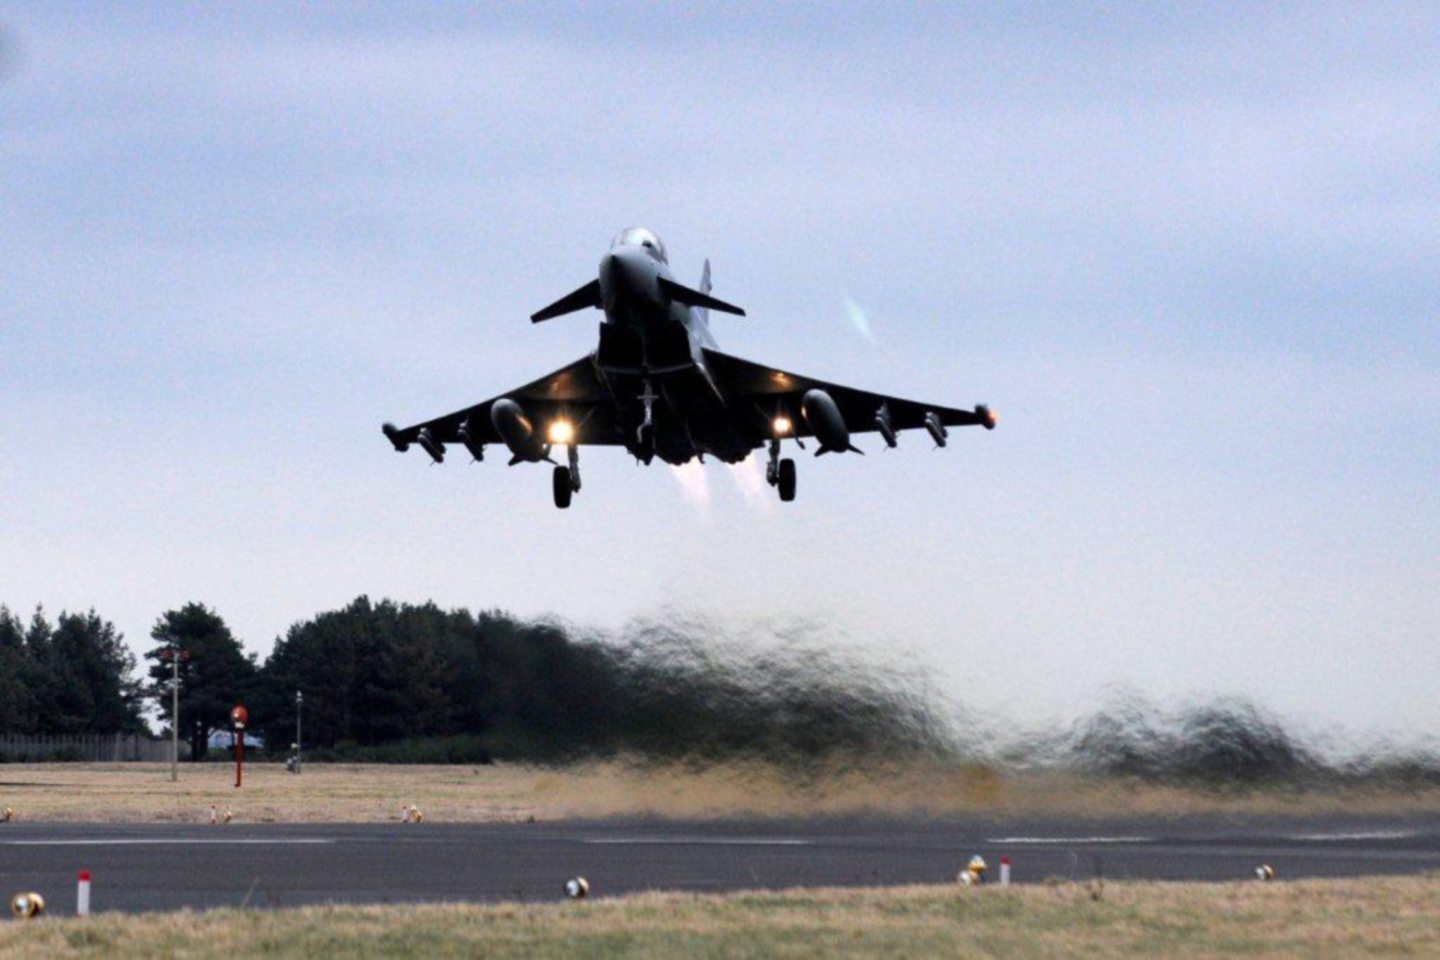 A Typhoon jet takes off.